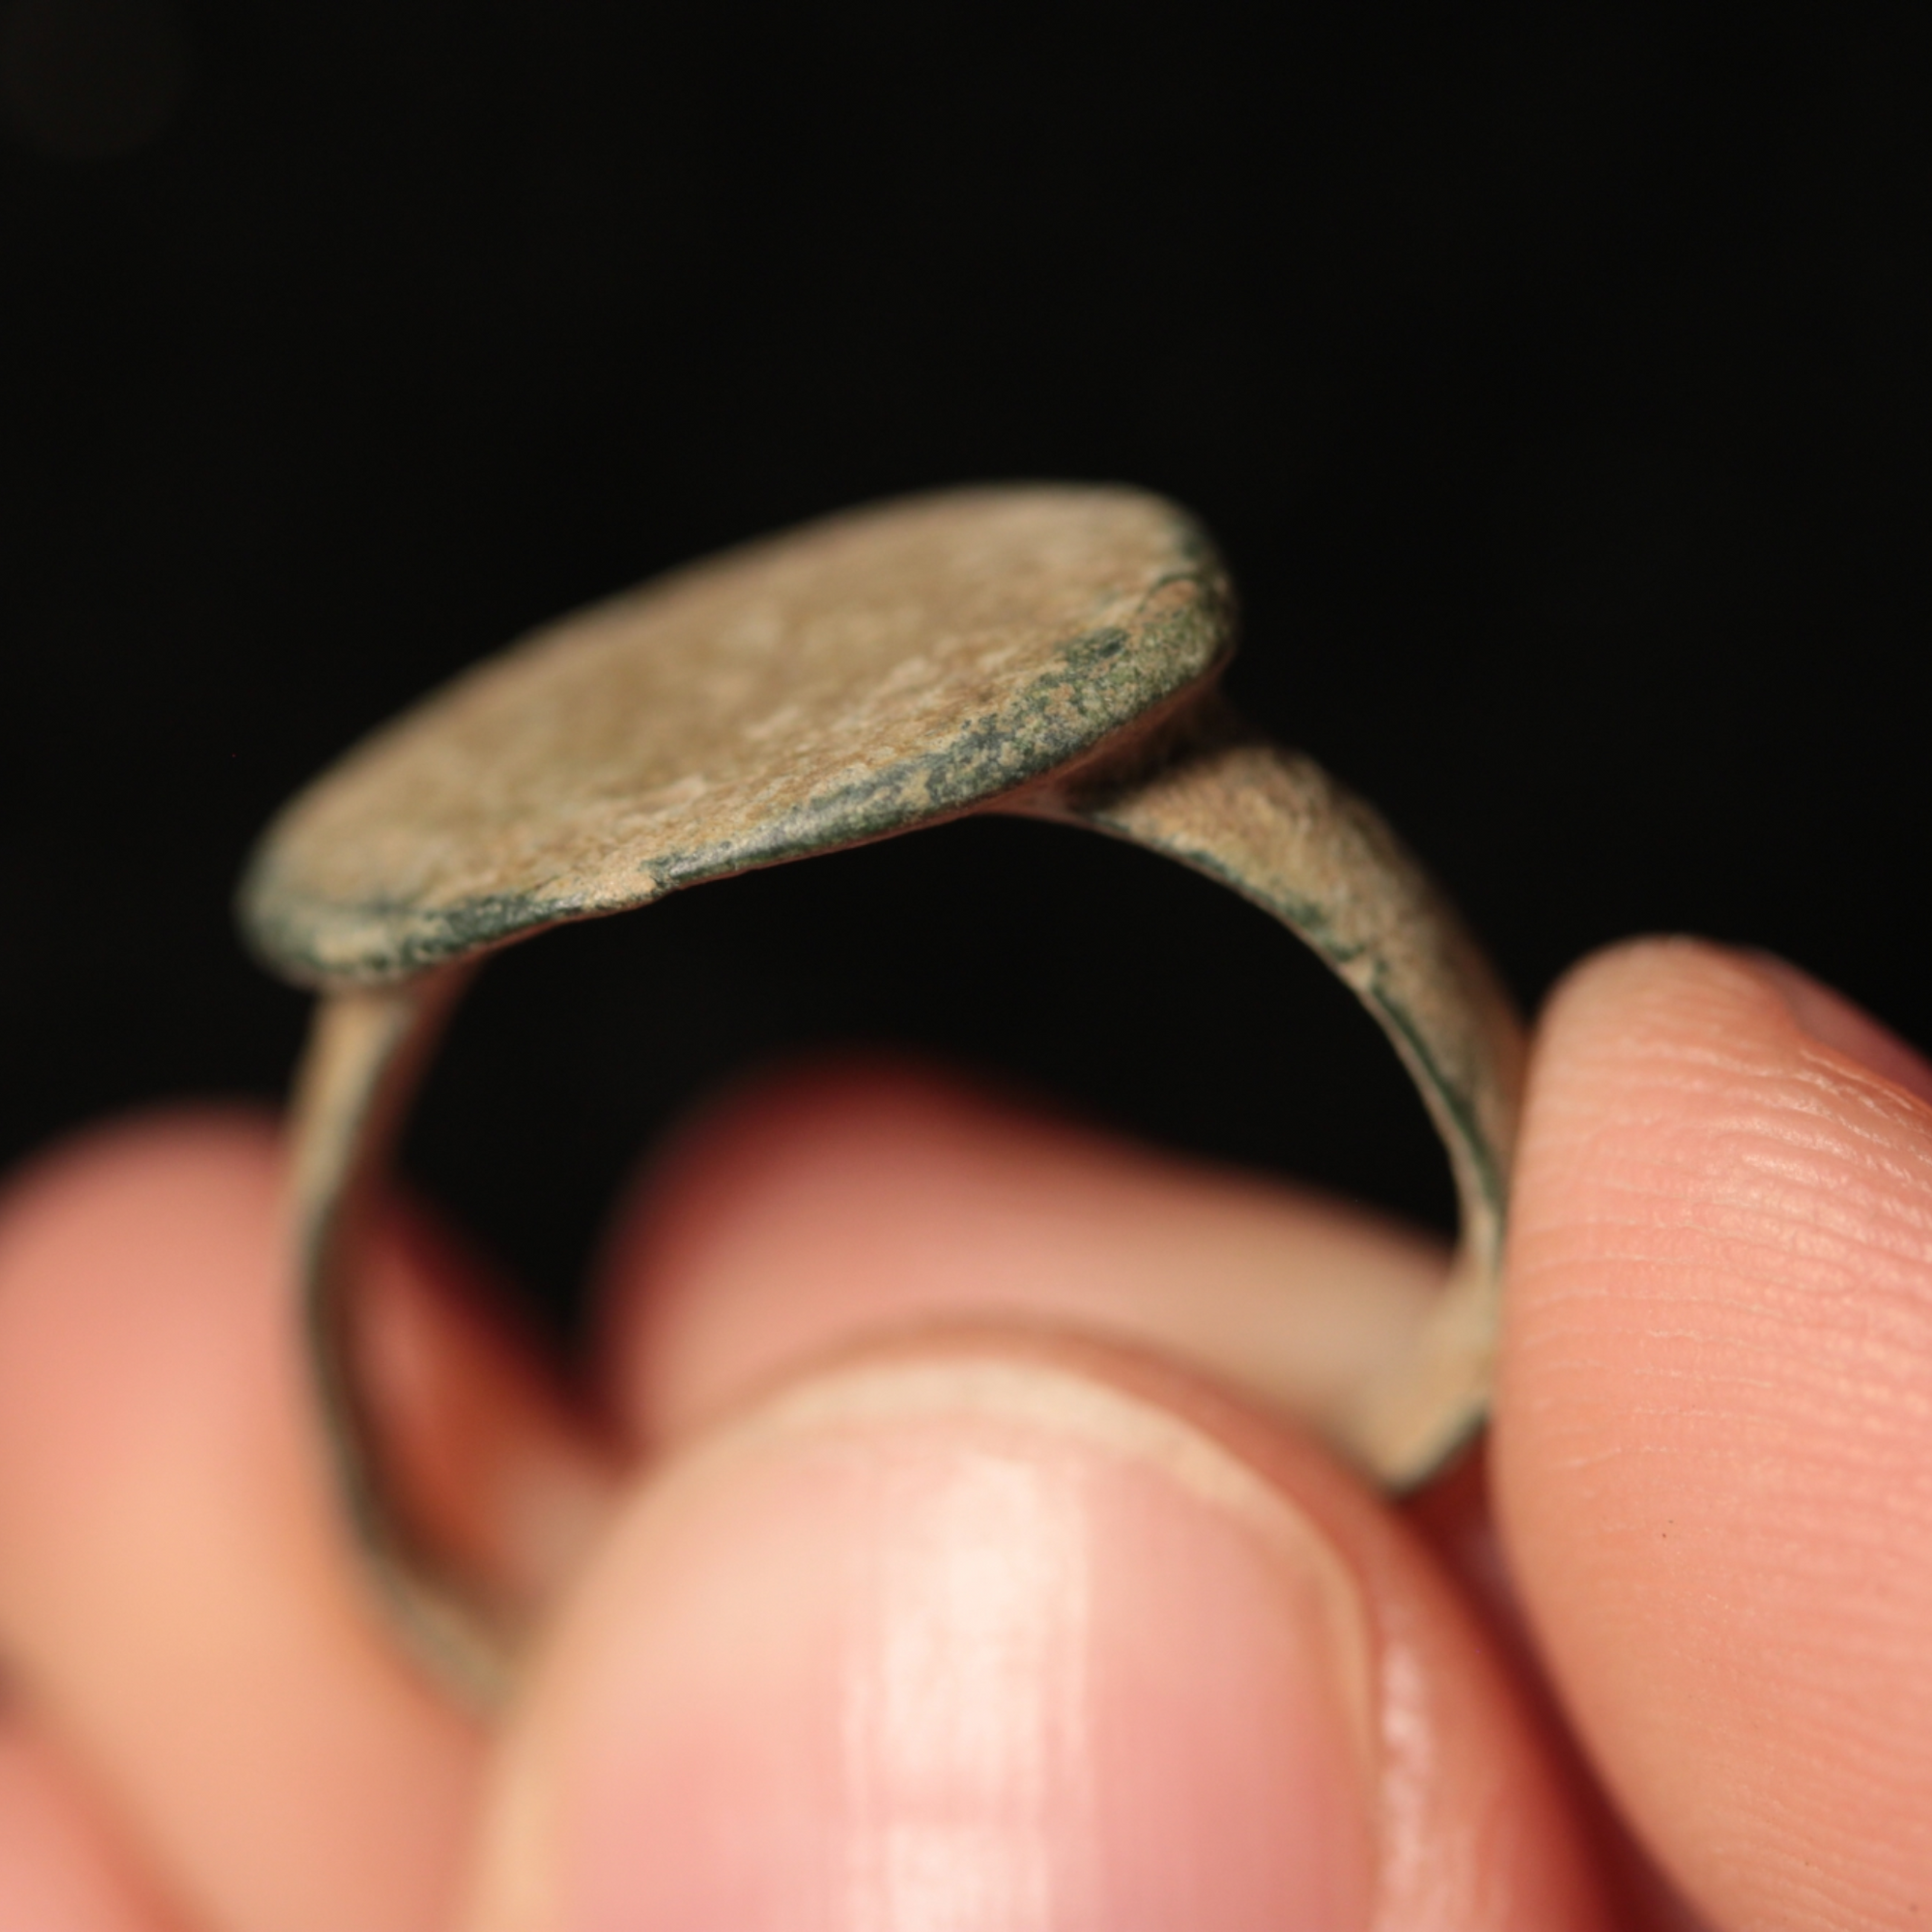 Ancient or Early Medieval Bronze Ring, #3 - c. 800 BCE to 1000 CE - Central/Eastern Europe - 3/8/23 Auction